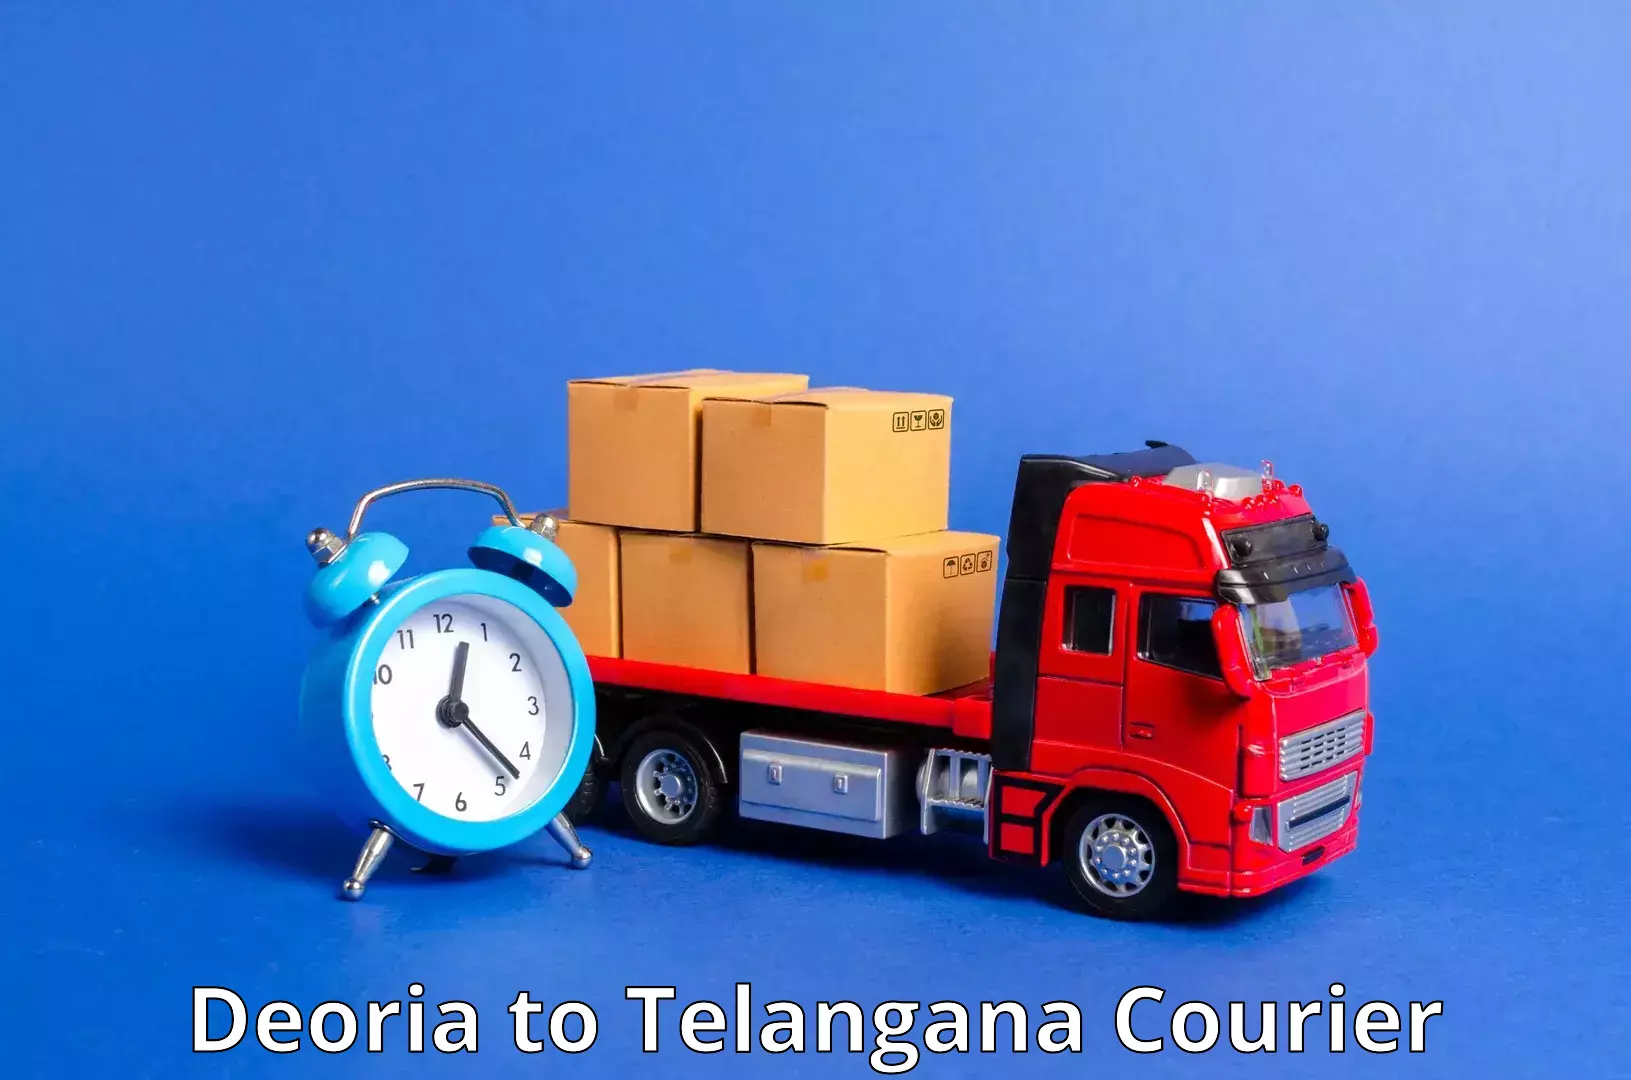 Holiday shipping services Deoria to Bejjanki